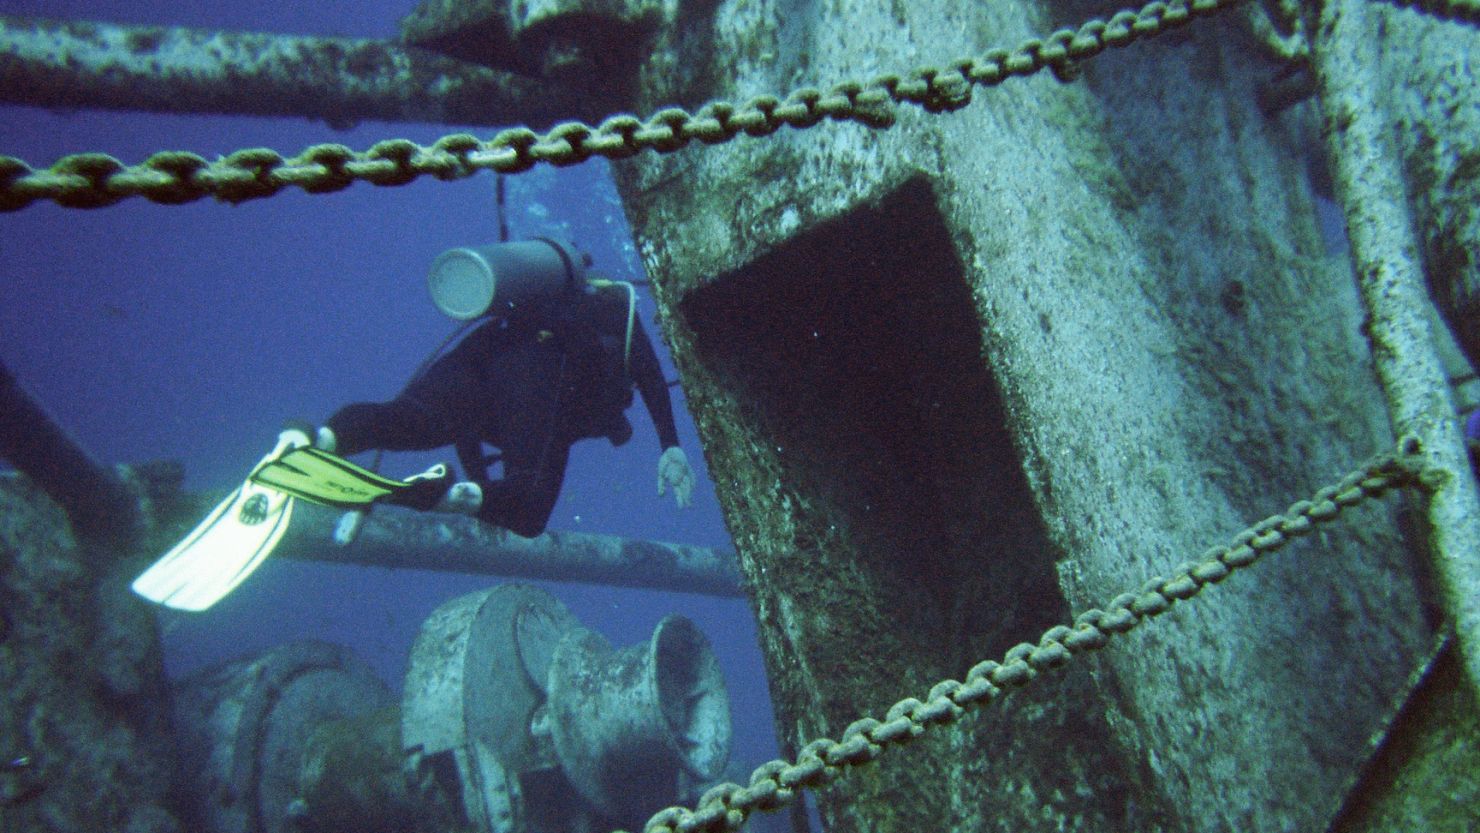 The decommissioned USS Kittiwake has retired as a dive site just off the coast of Grand Cayman.